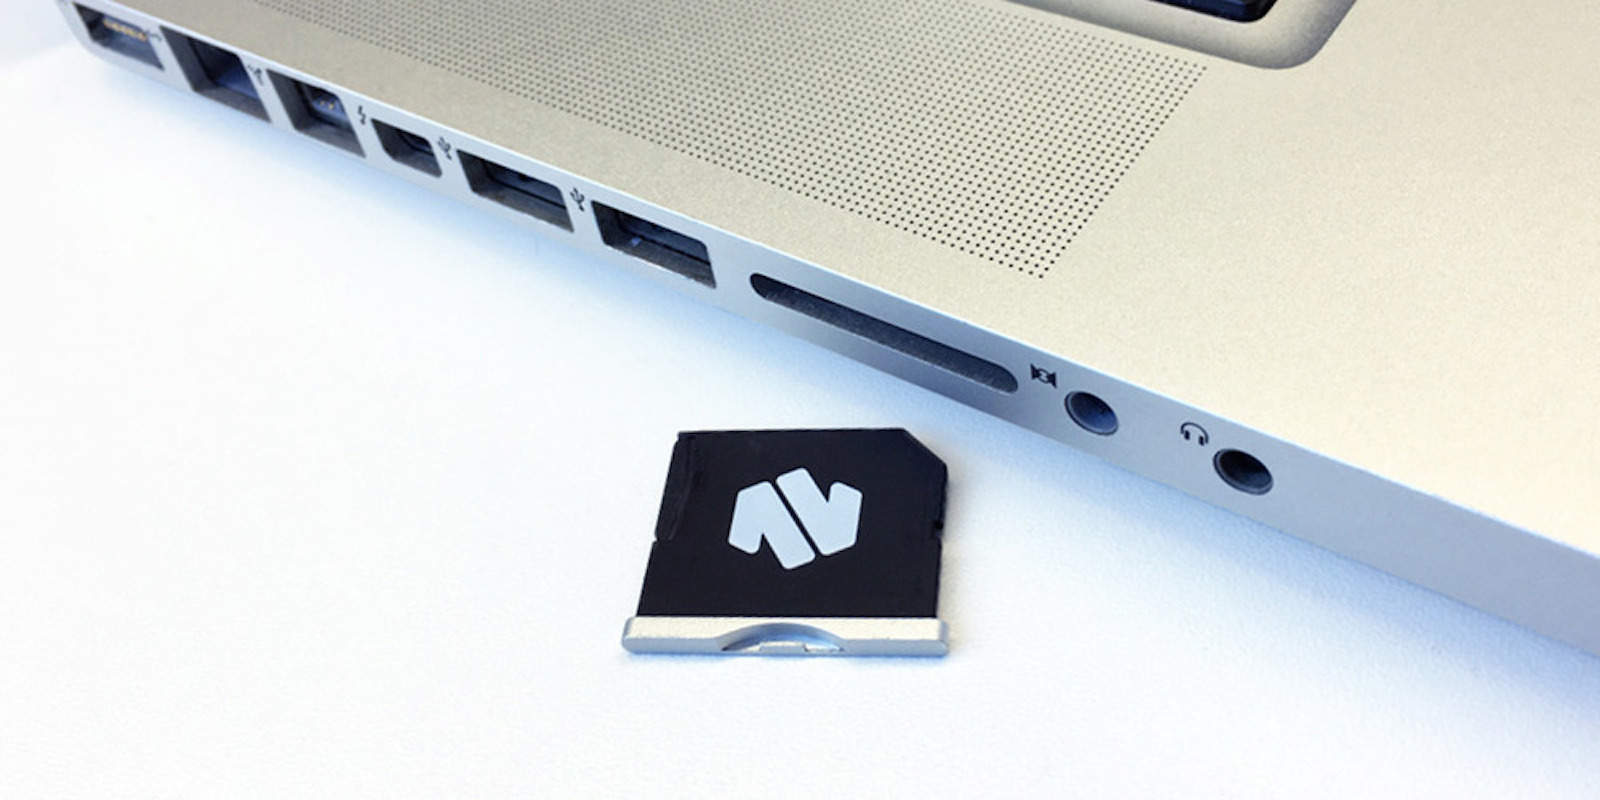 Seamlessly add up to 256GB to your Macbook with this handy MicroSD adapter